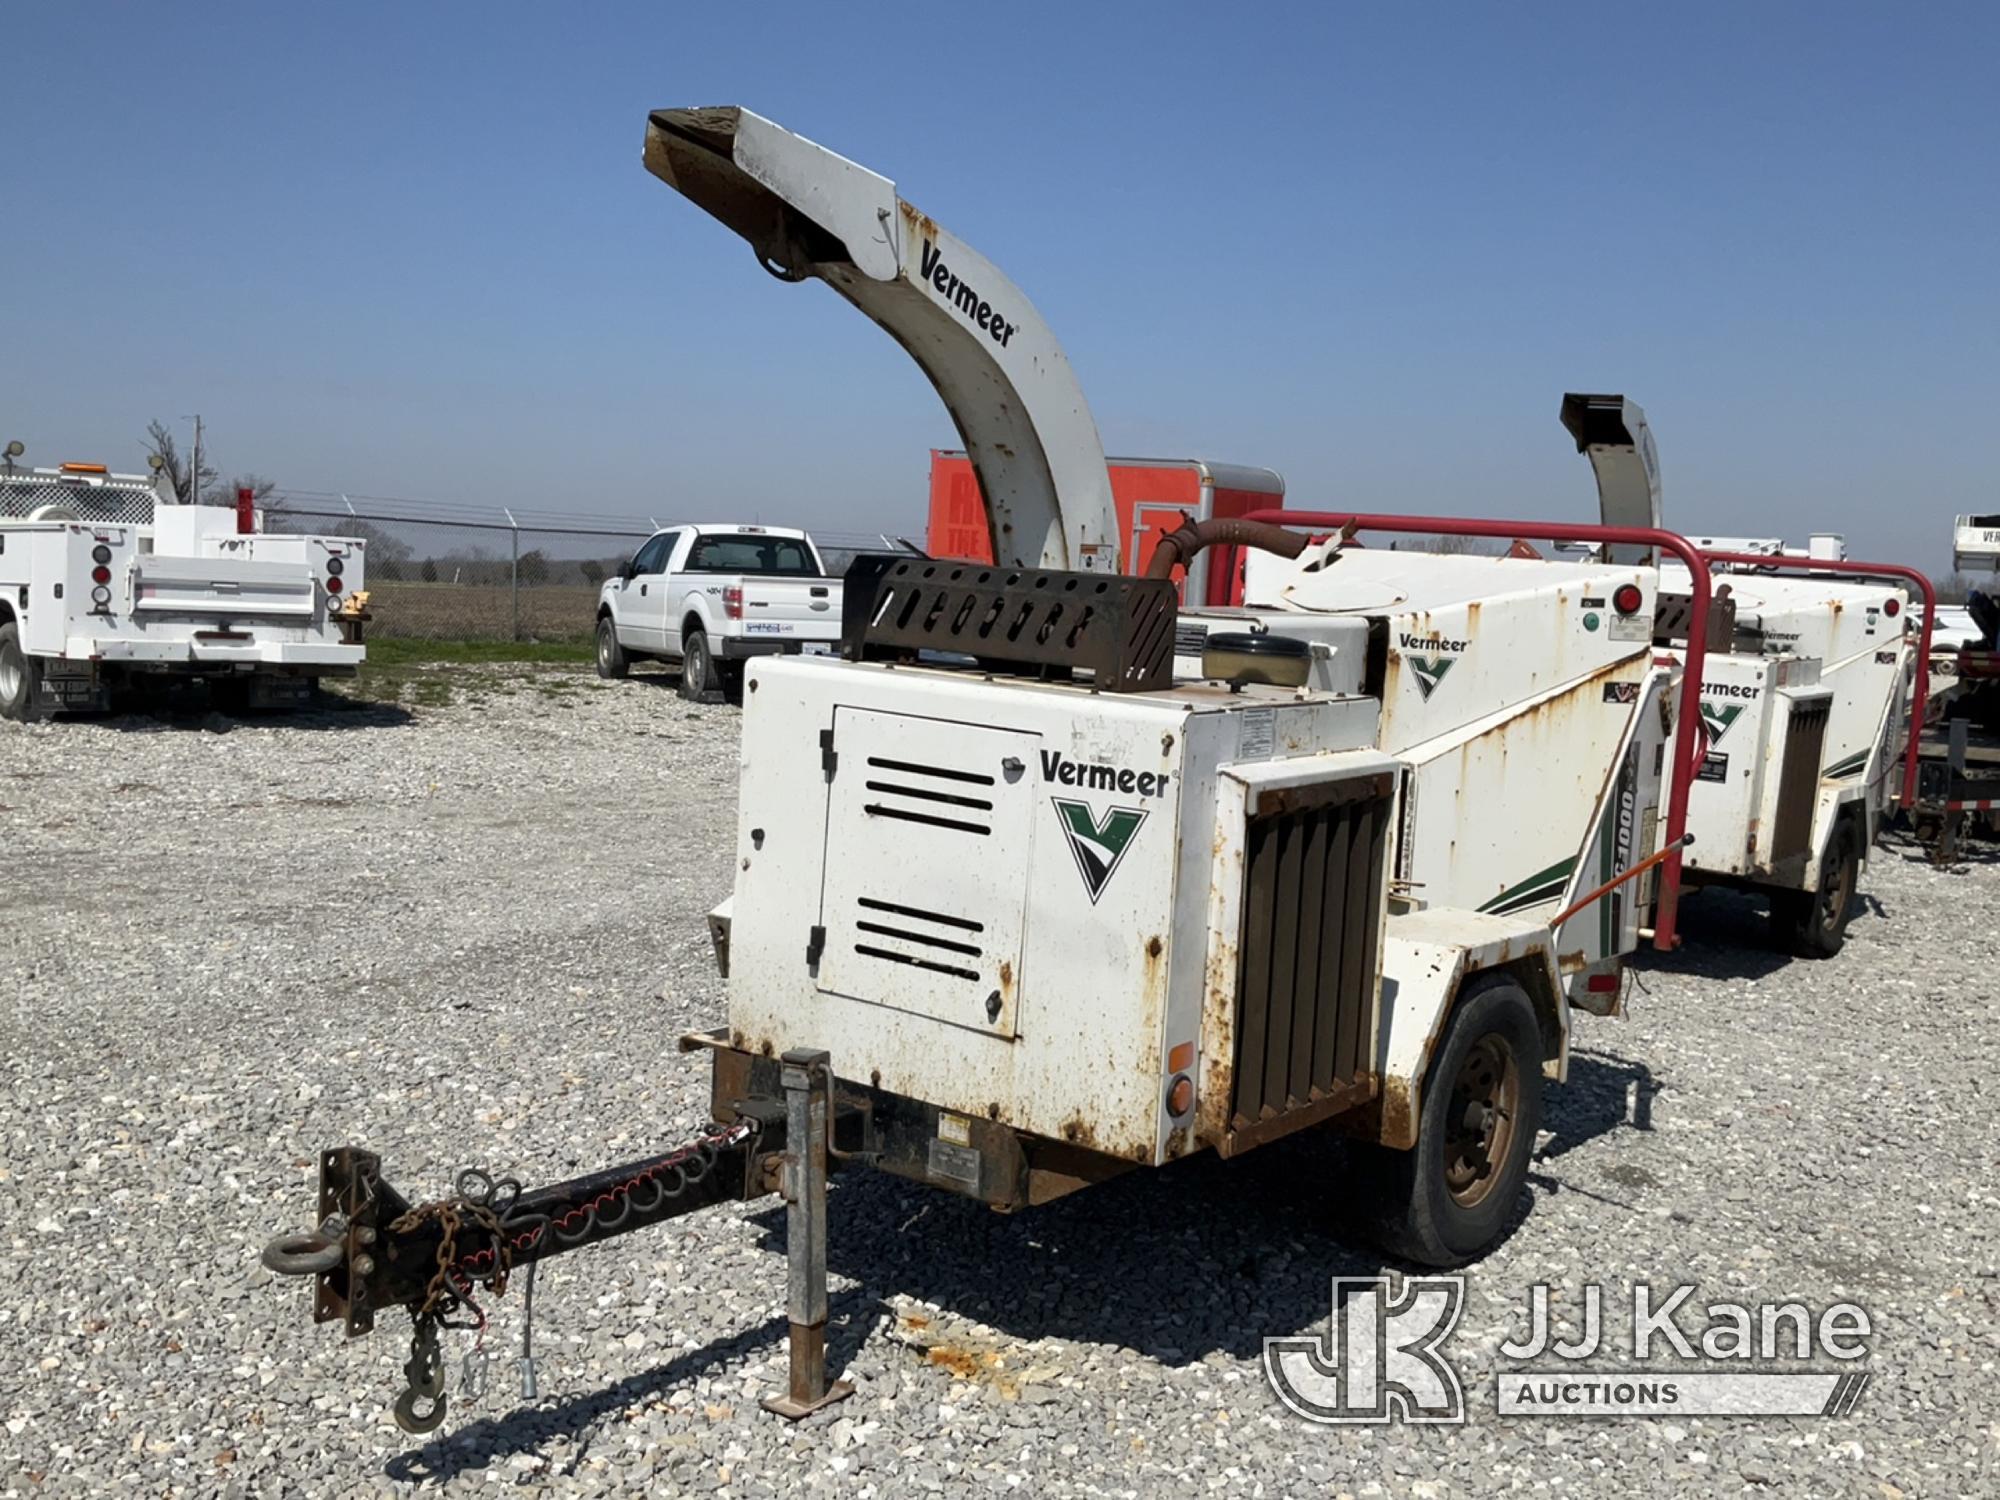 (Hawk Point, MO) 2014 Vermeer BC1000XL Chipper (12in Drum) No Title) (Runs & Operates) (Jump to Star